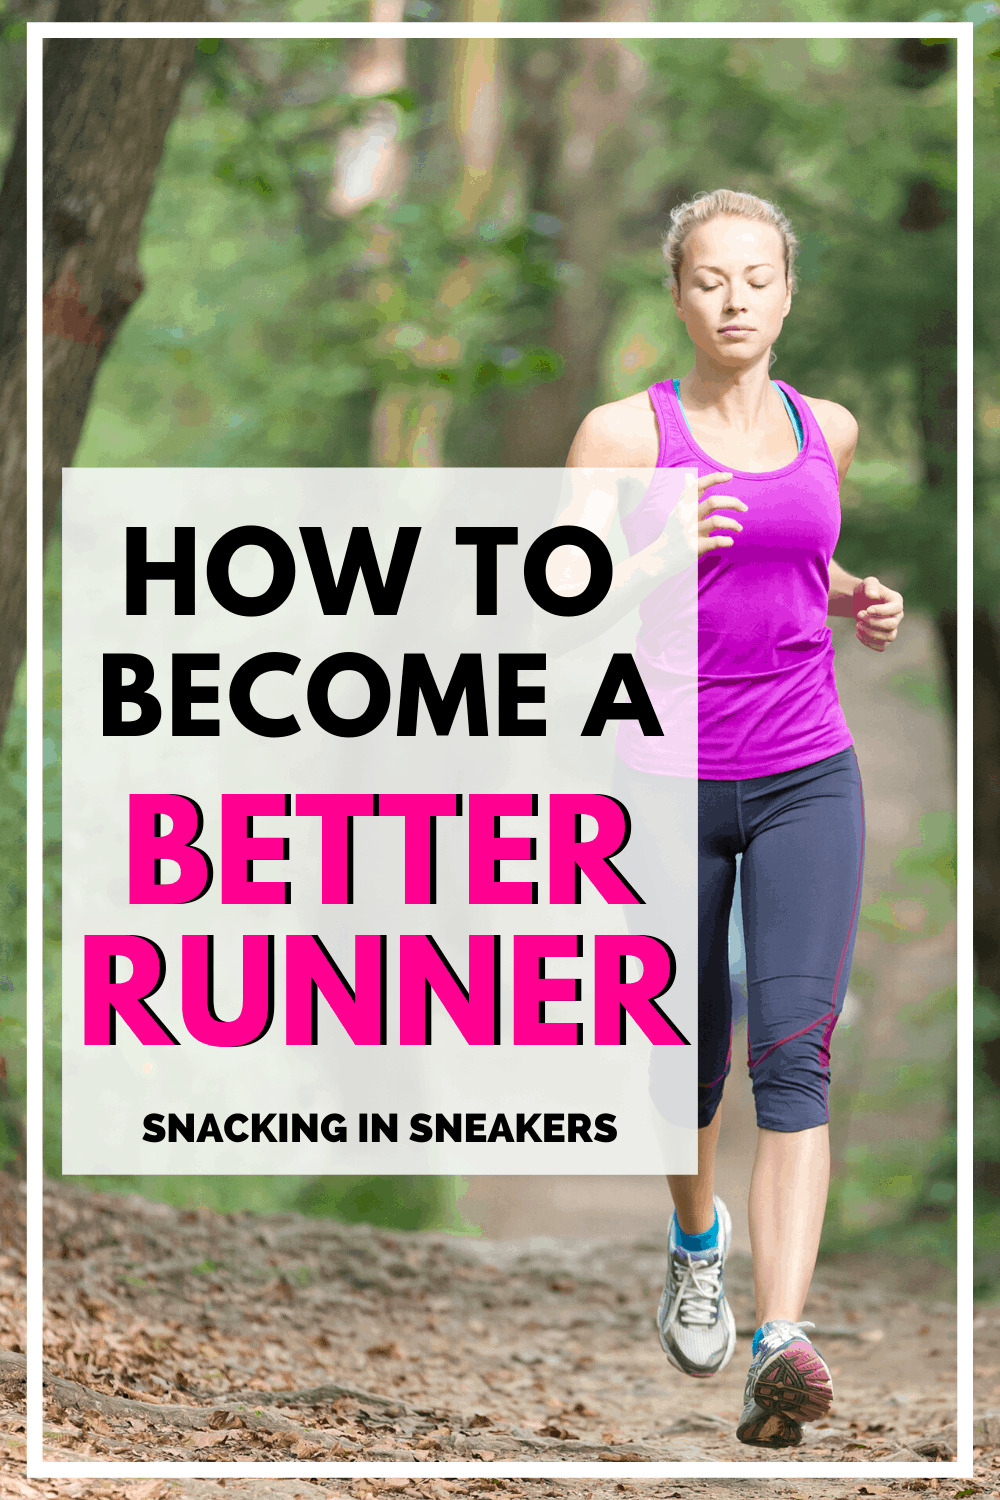 How to Become a Better Runner - Snacking in Sneakers